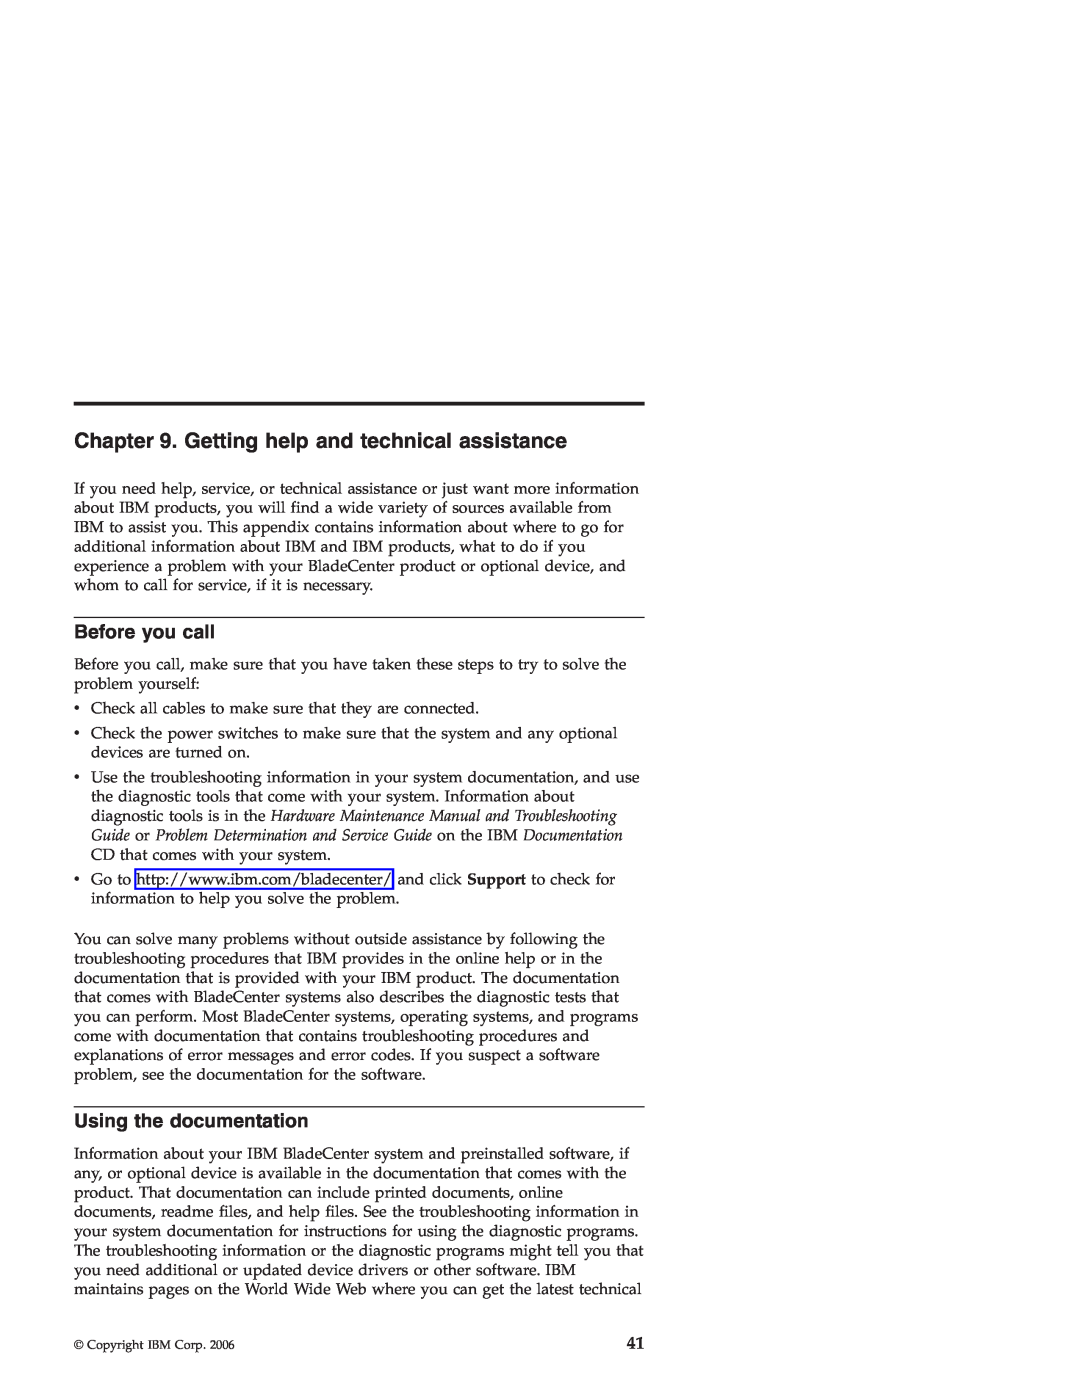 IBM Nortel 10 manual Getting help and technical assistance, Before you call, Using the documentation 